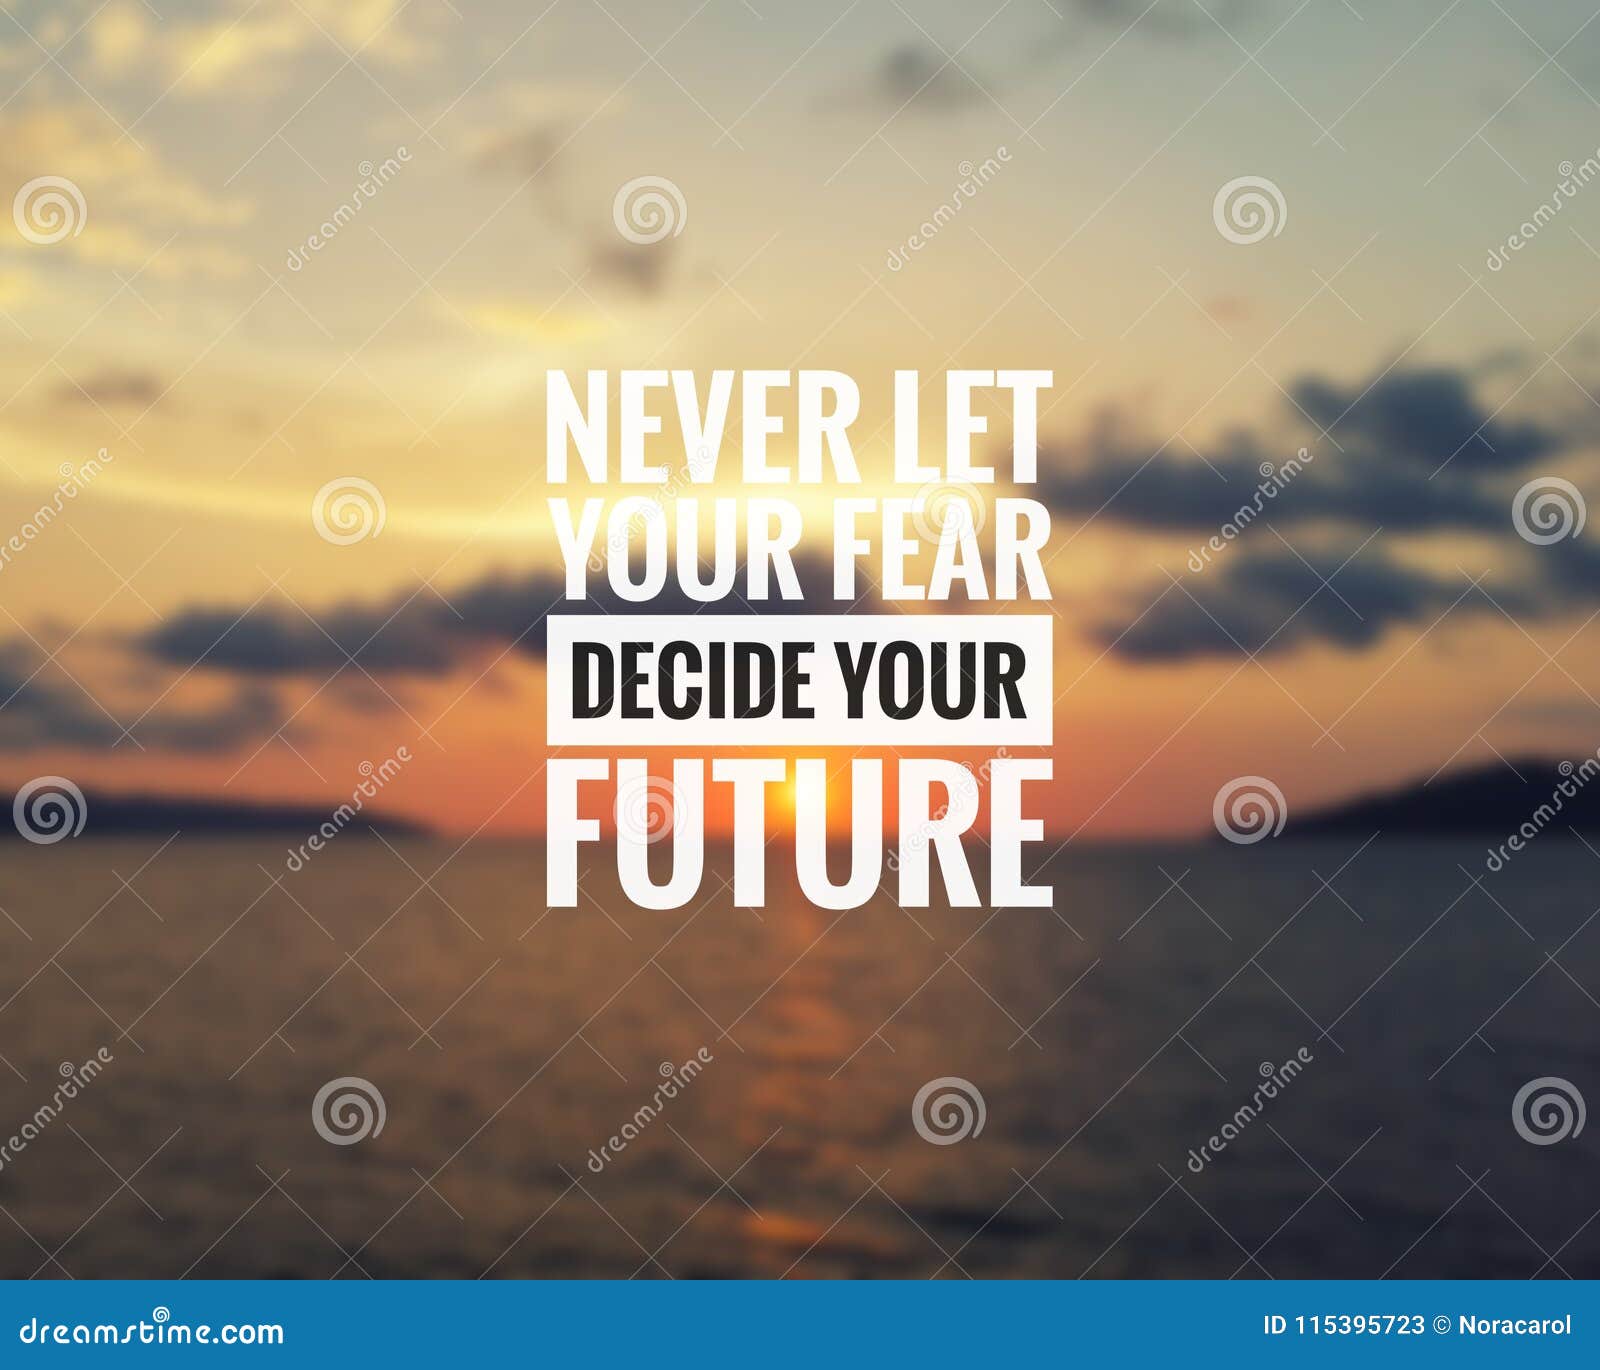 inspirational quote - never let your fear decide your future